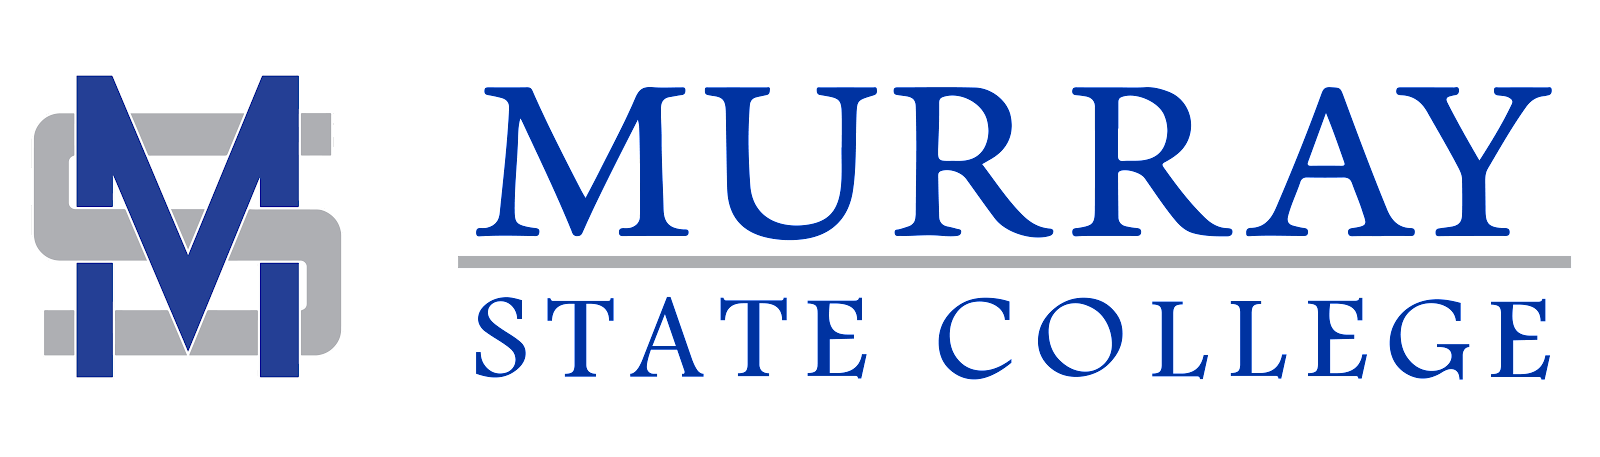 Murray State College  logo 